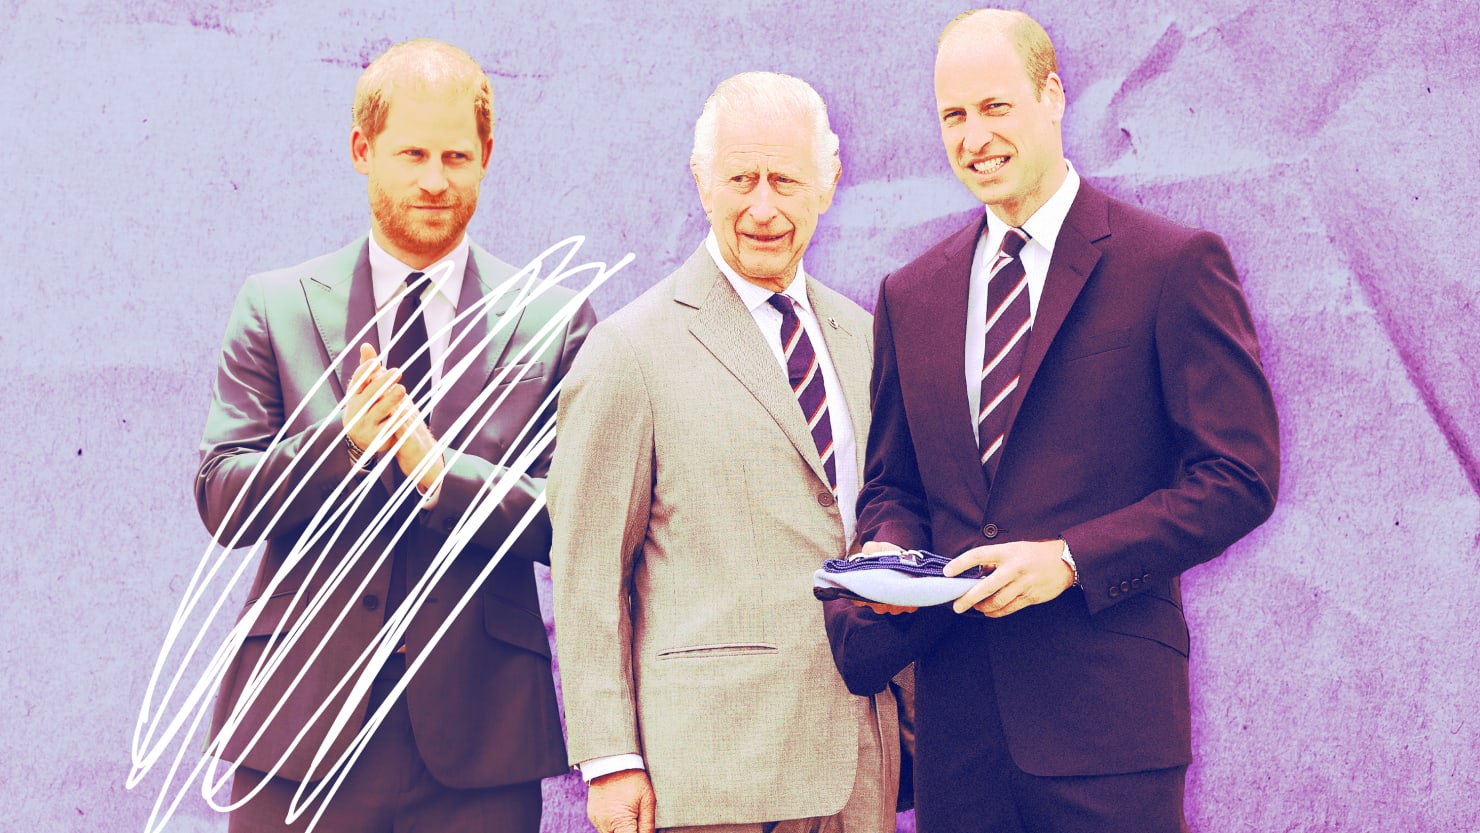 Prince William’s new party is the “nail in the coffin” for Prince Harry and the royal family